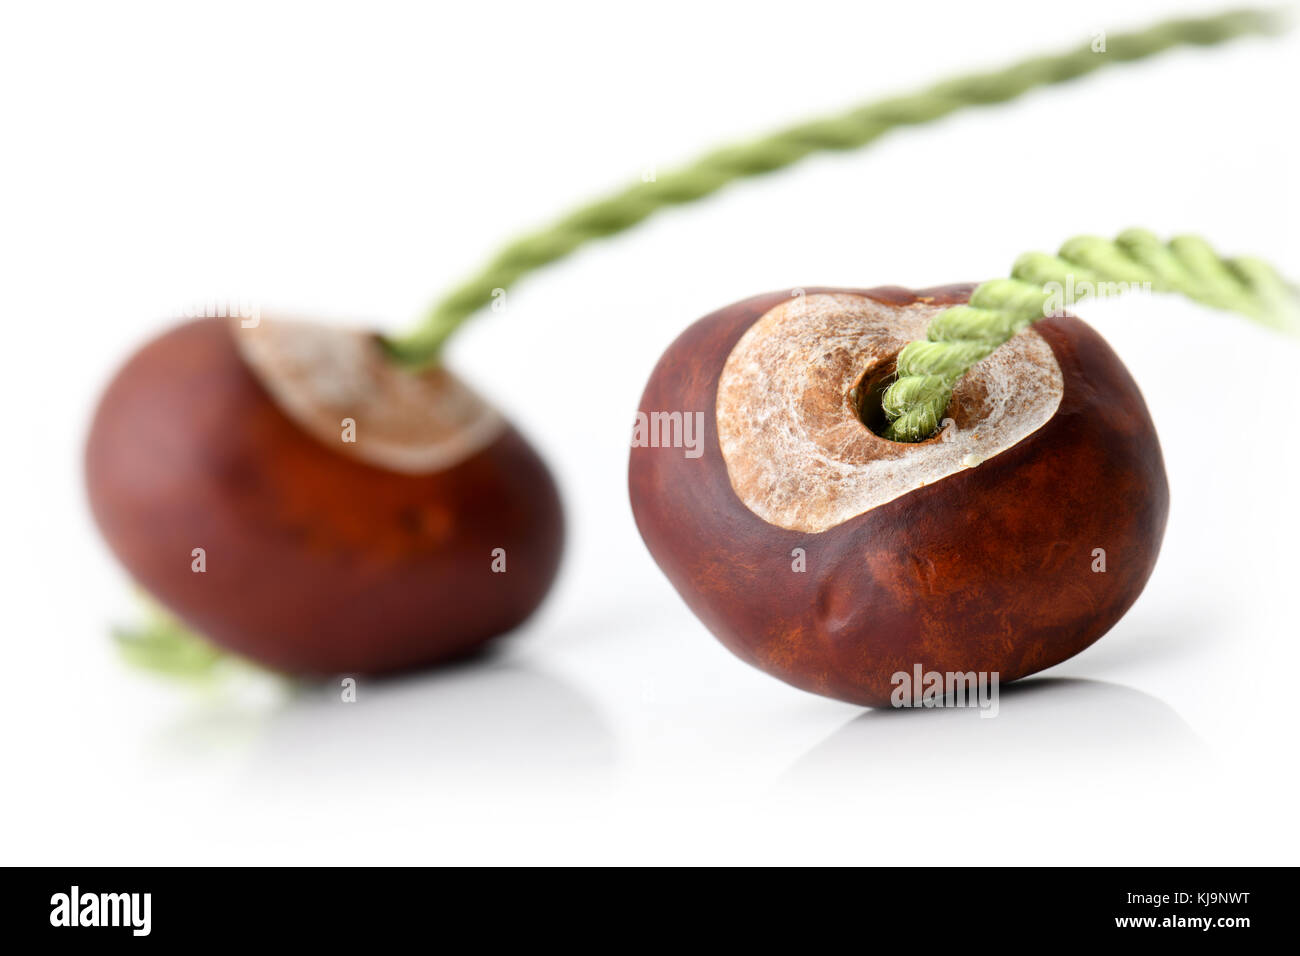 two conkers with strings ready to play Stock Photo